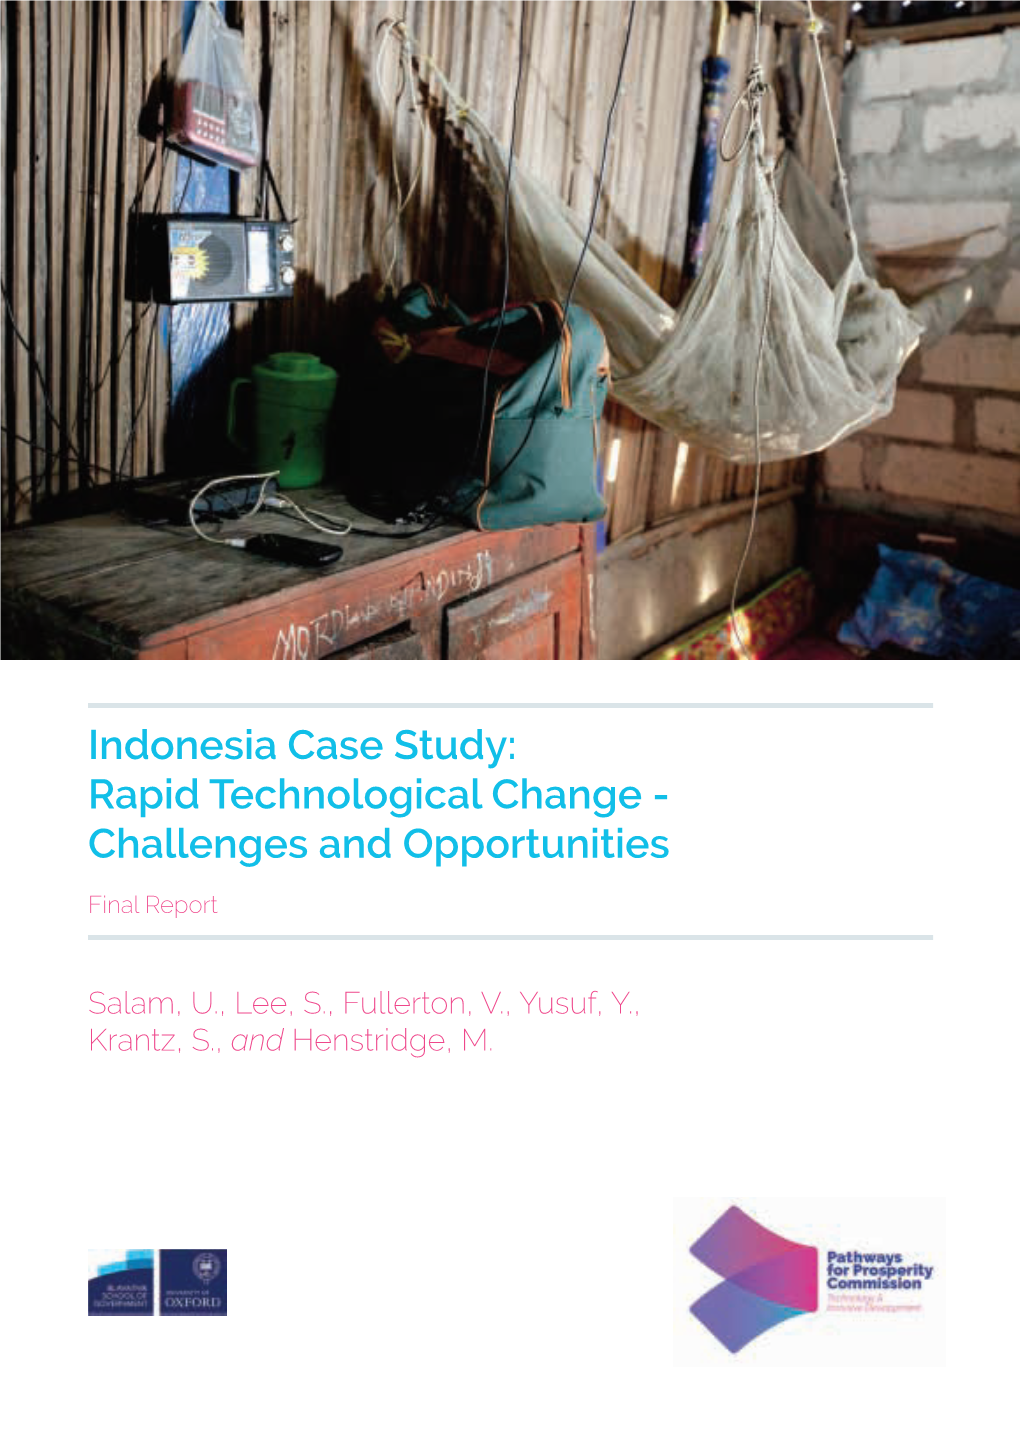 Indonesia Case Study: Rapid Technological Change - Challenges and Opportunities